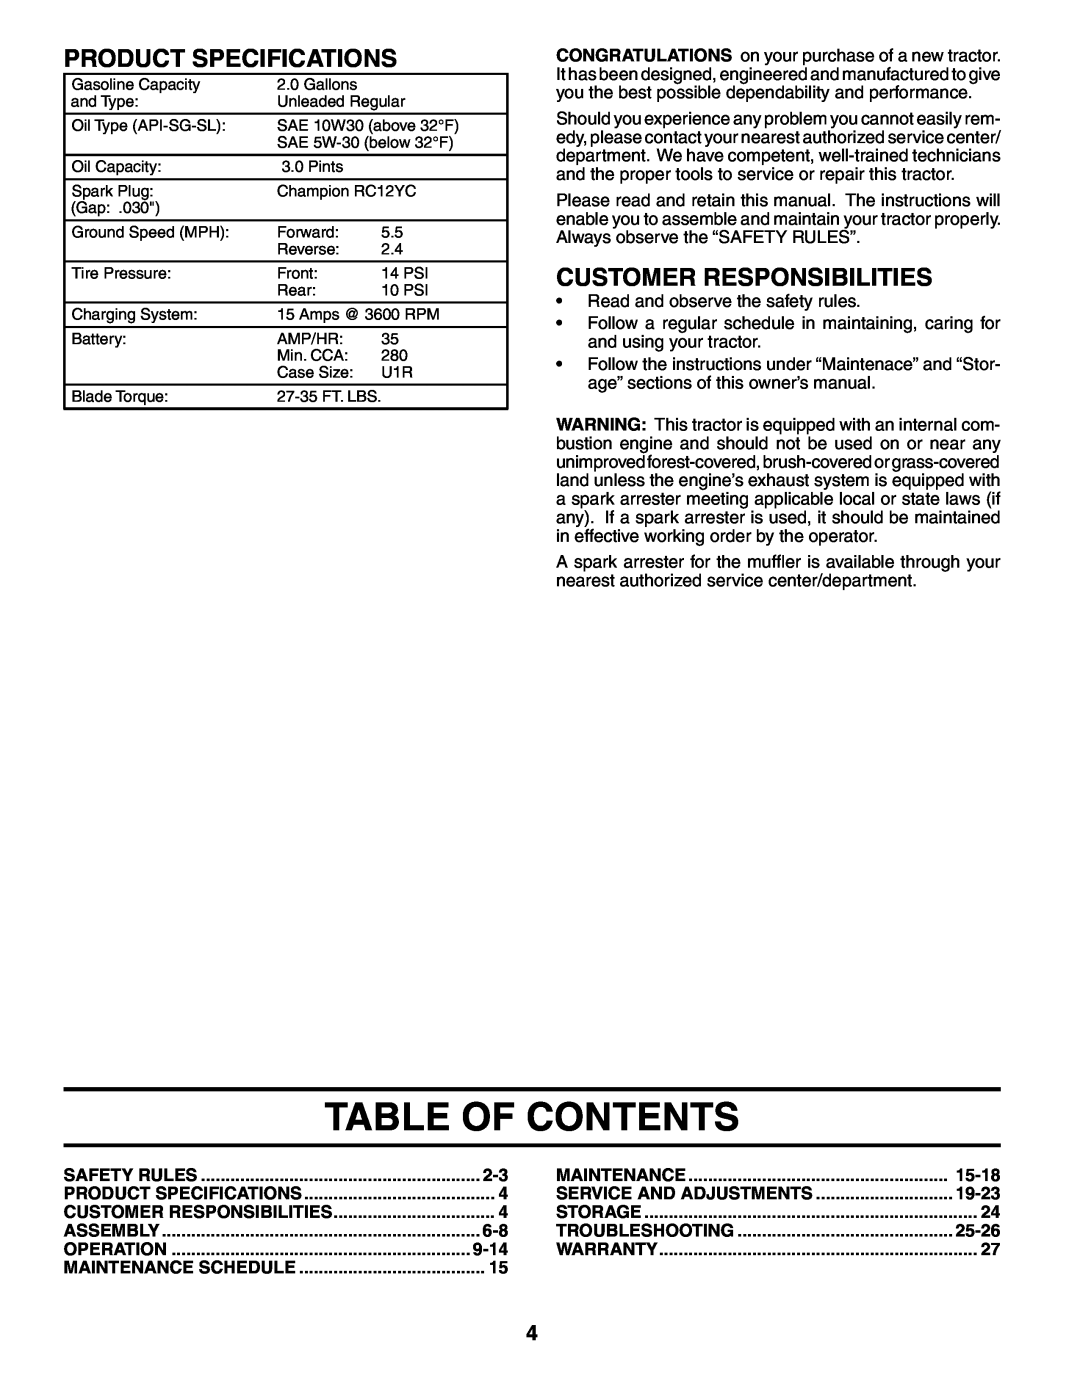 Poulan PK19H42YT manual Table Of Contents, Product Specifications, Customer Responsibilities 